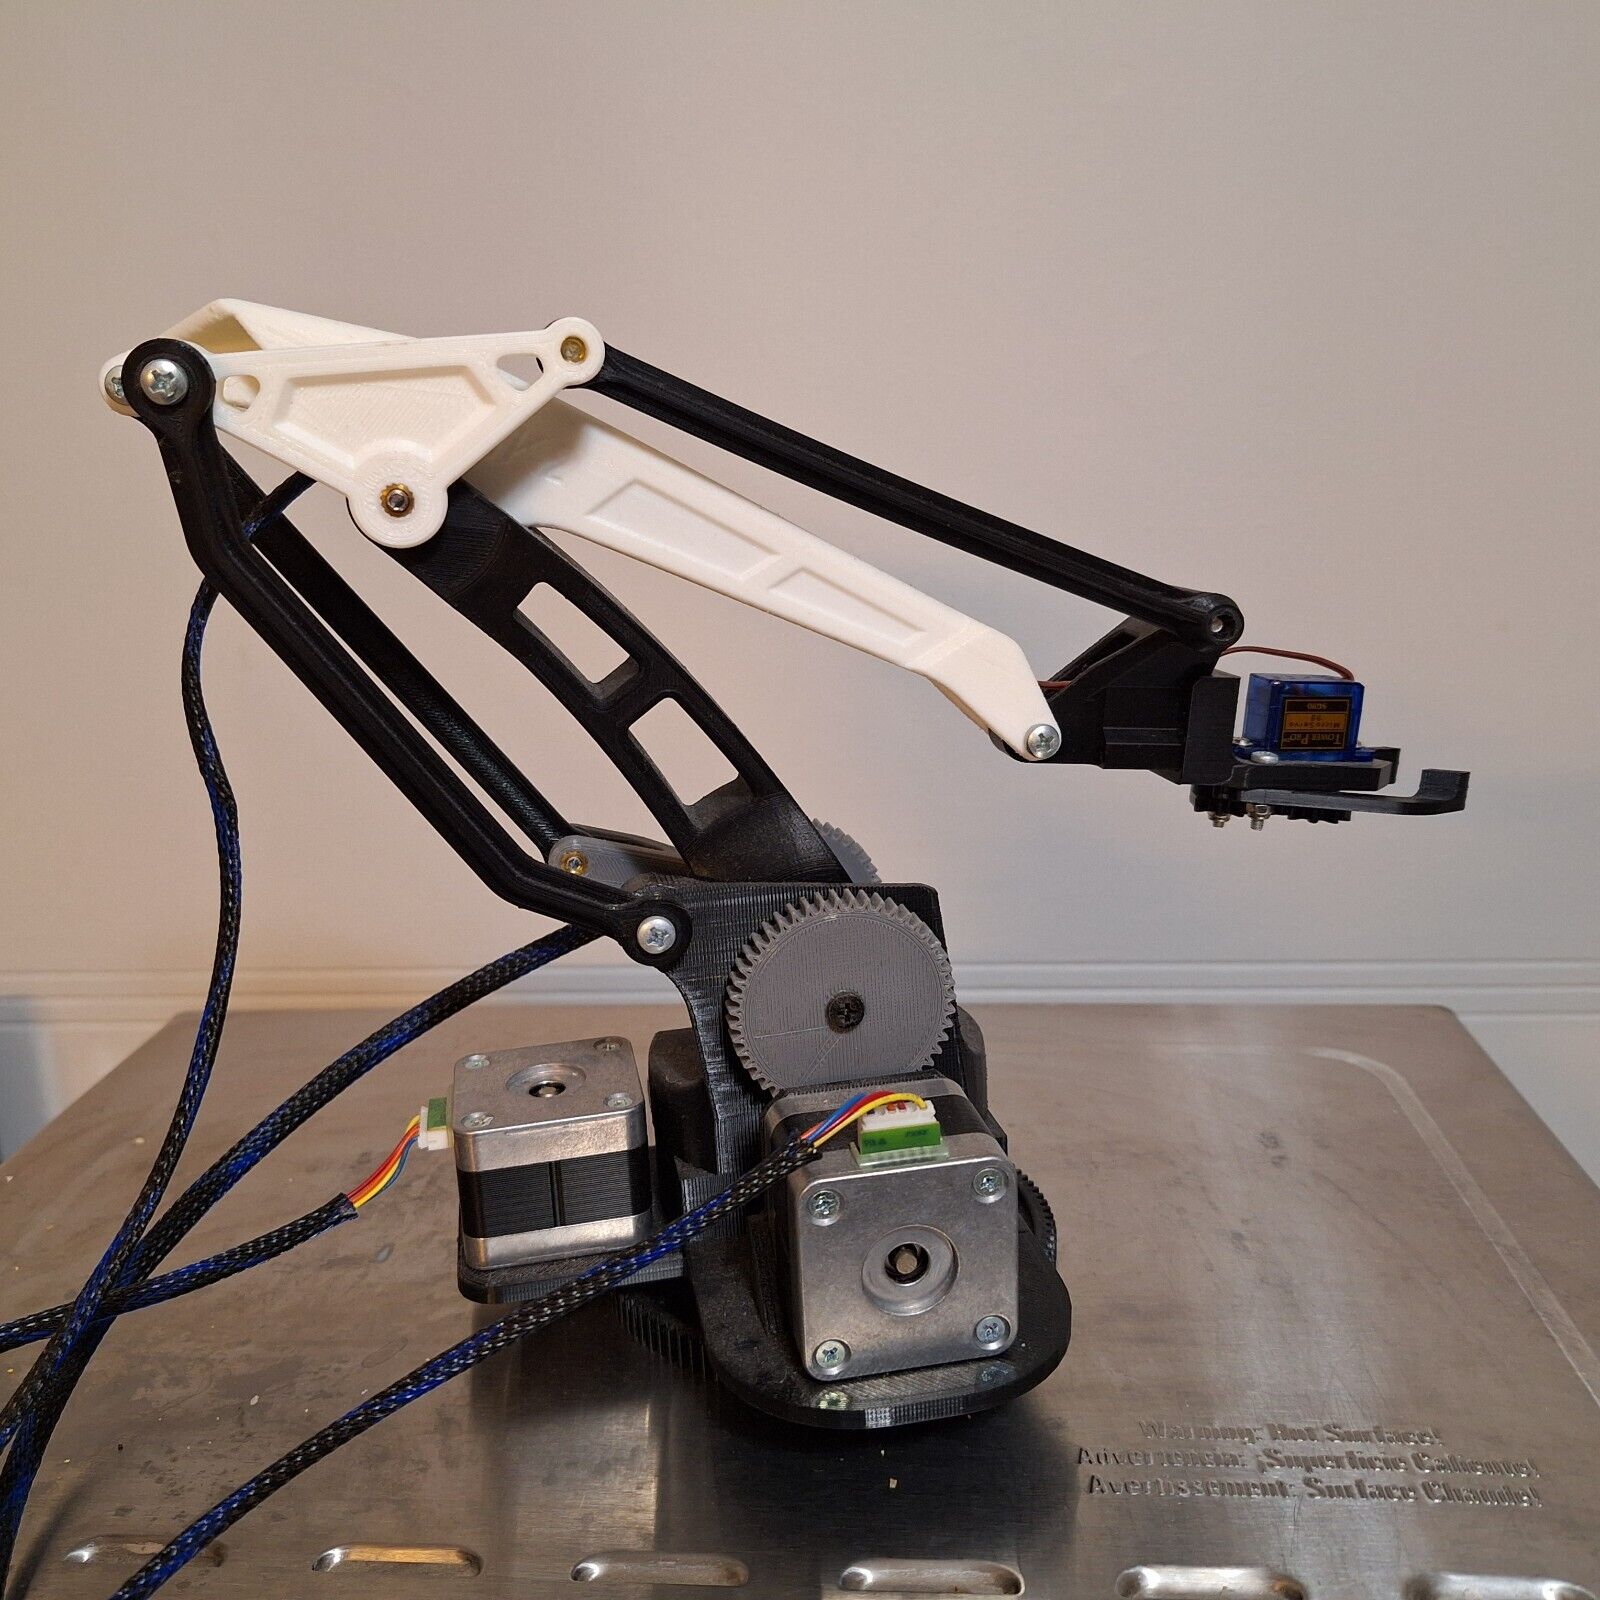 3D Printed Robot Arm with Stepper Motors for DIY